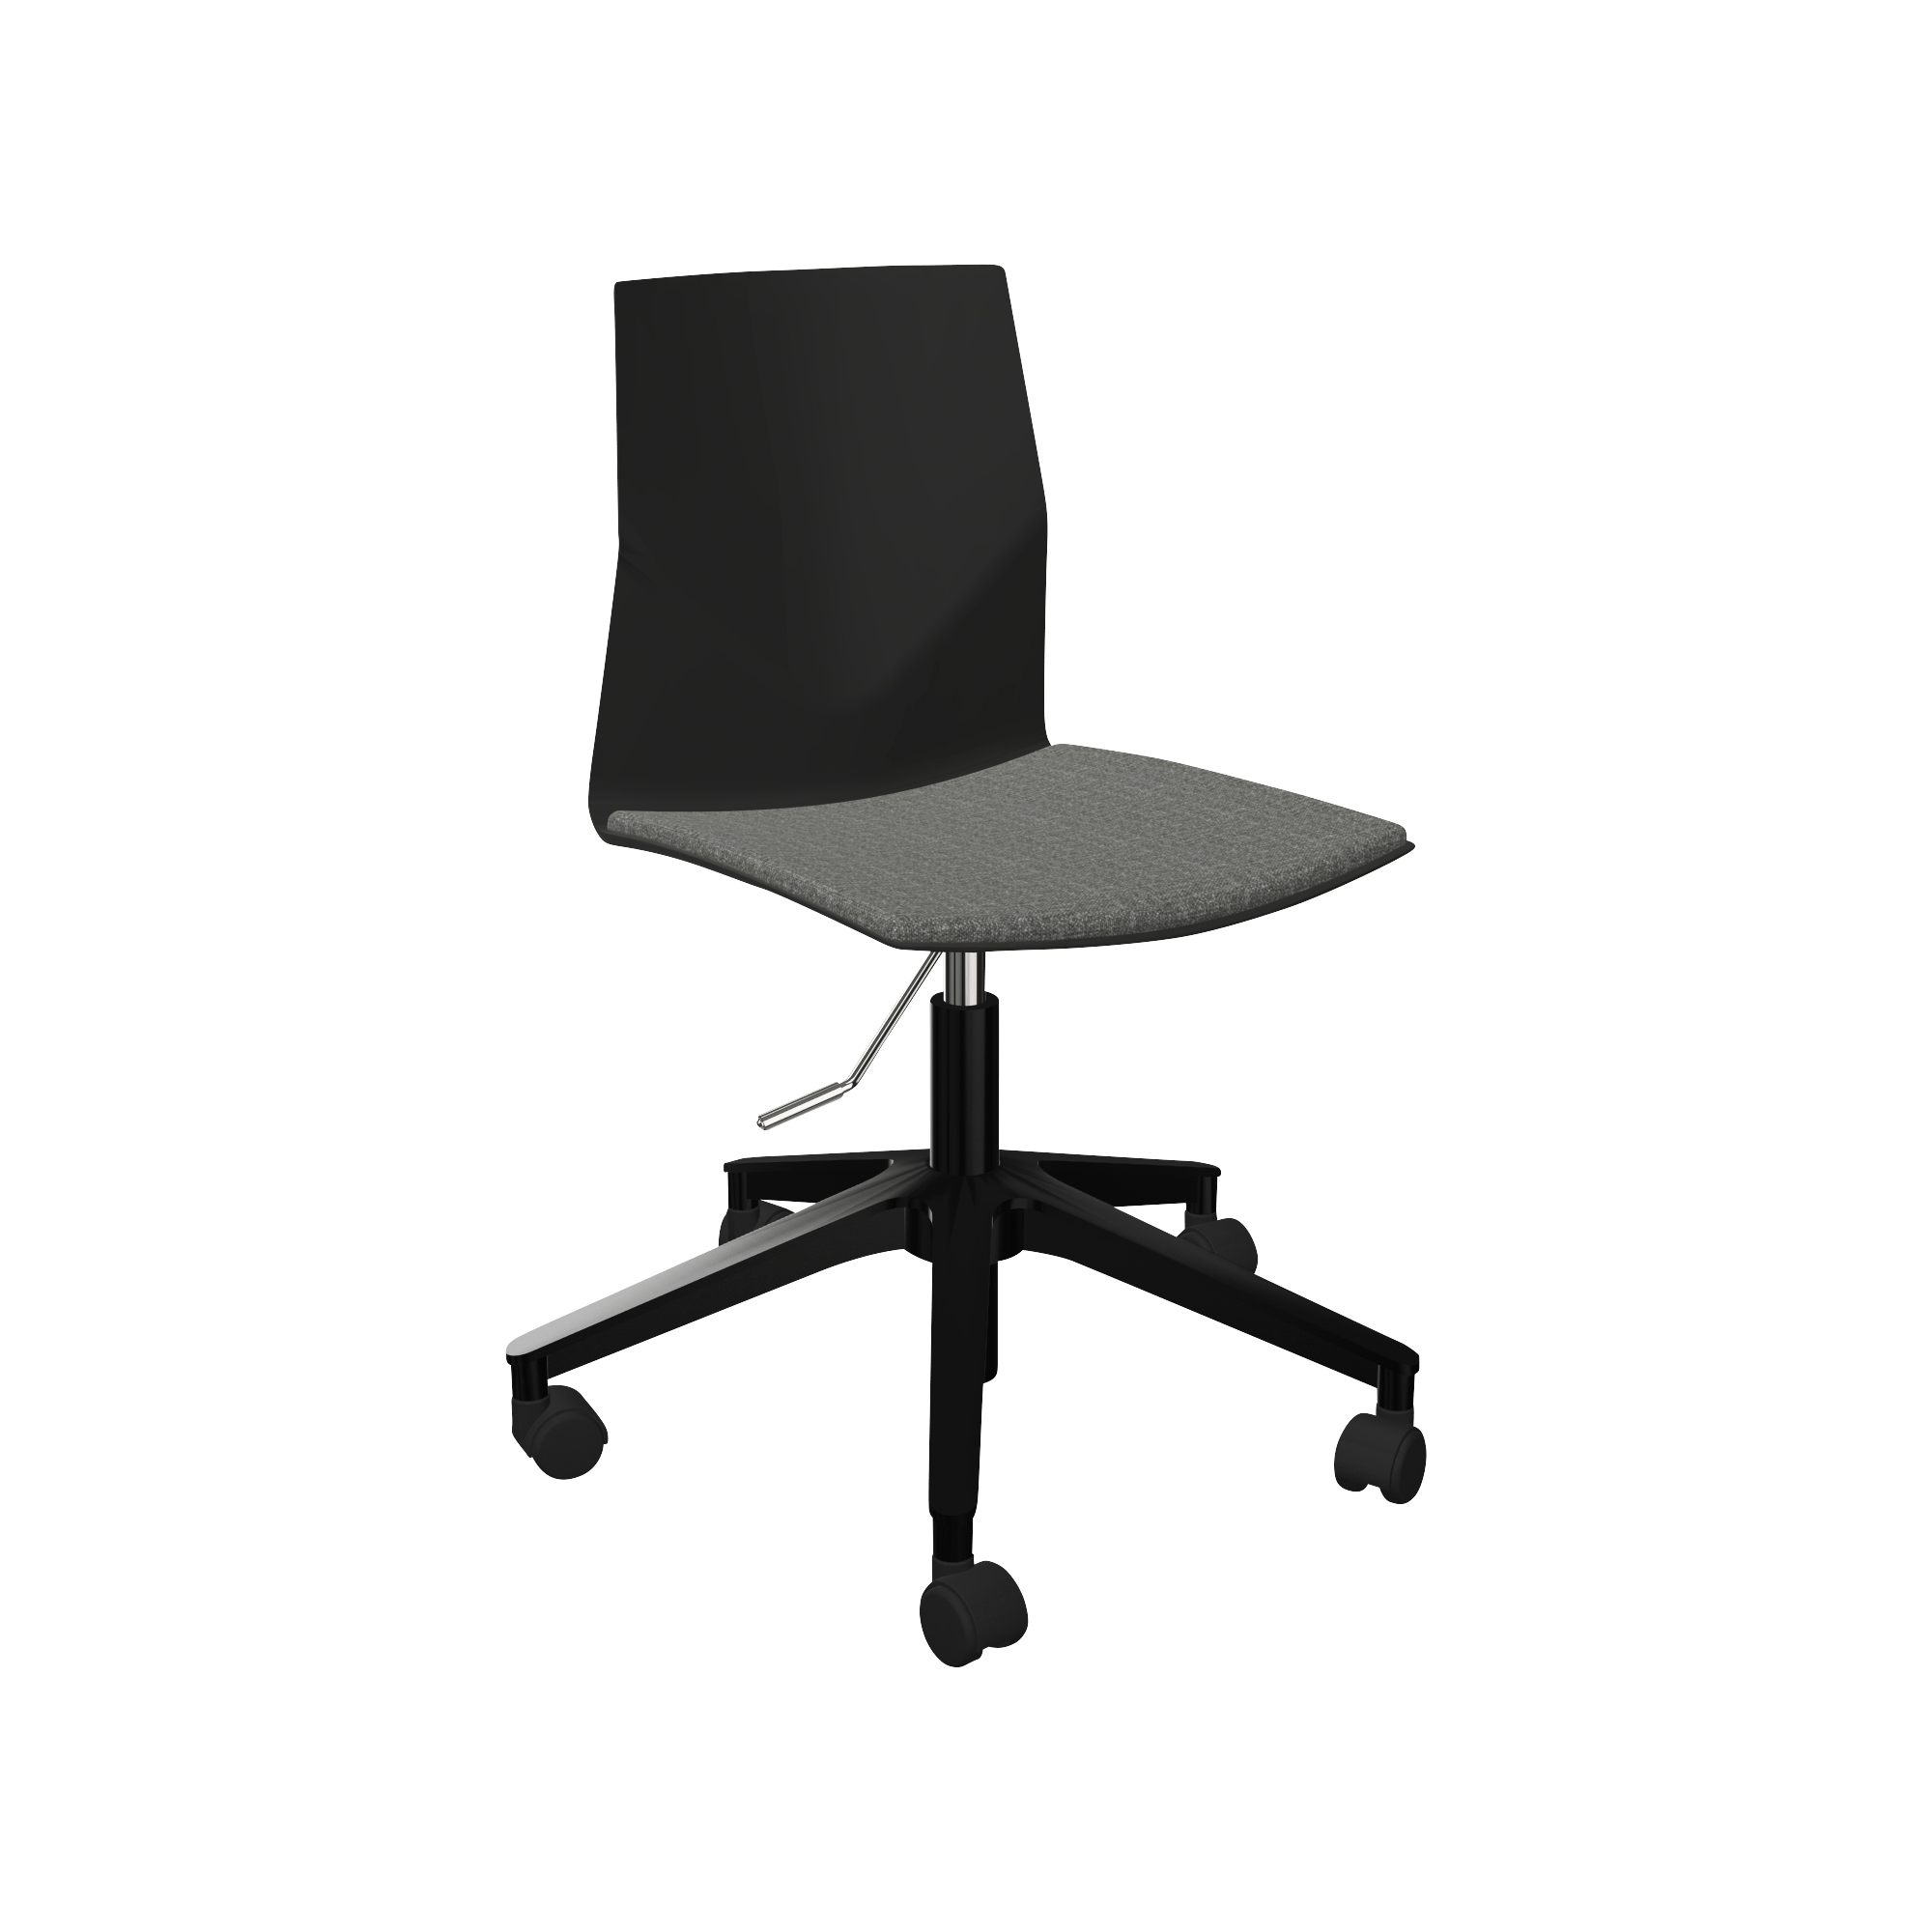 A black office chair with a grey upholstered seat.